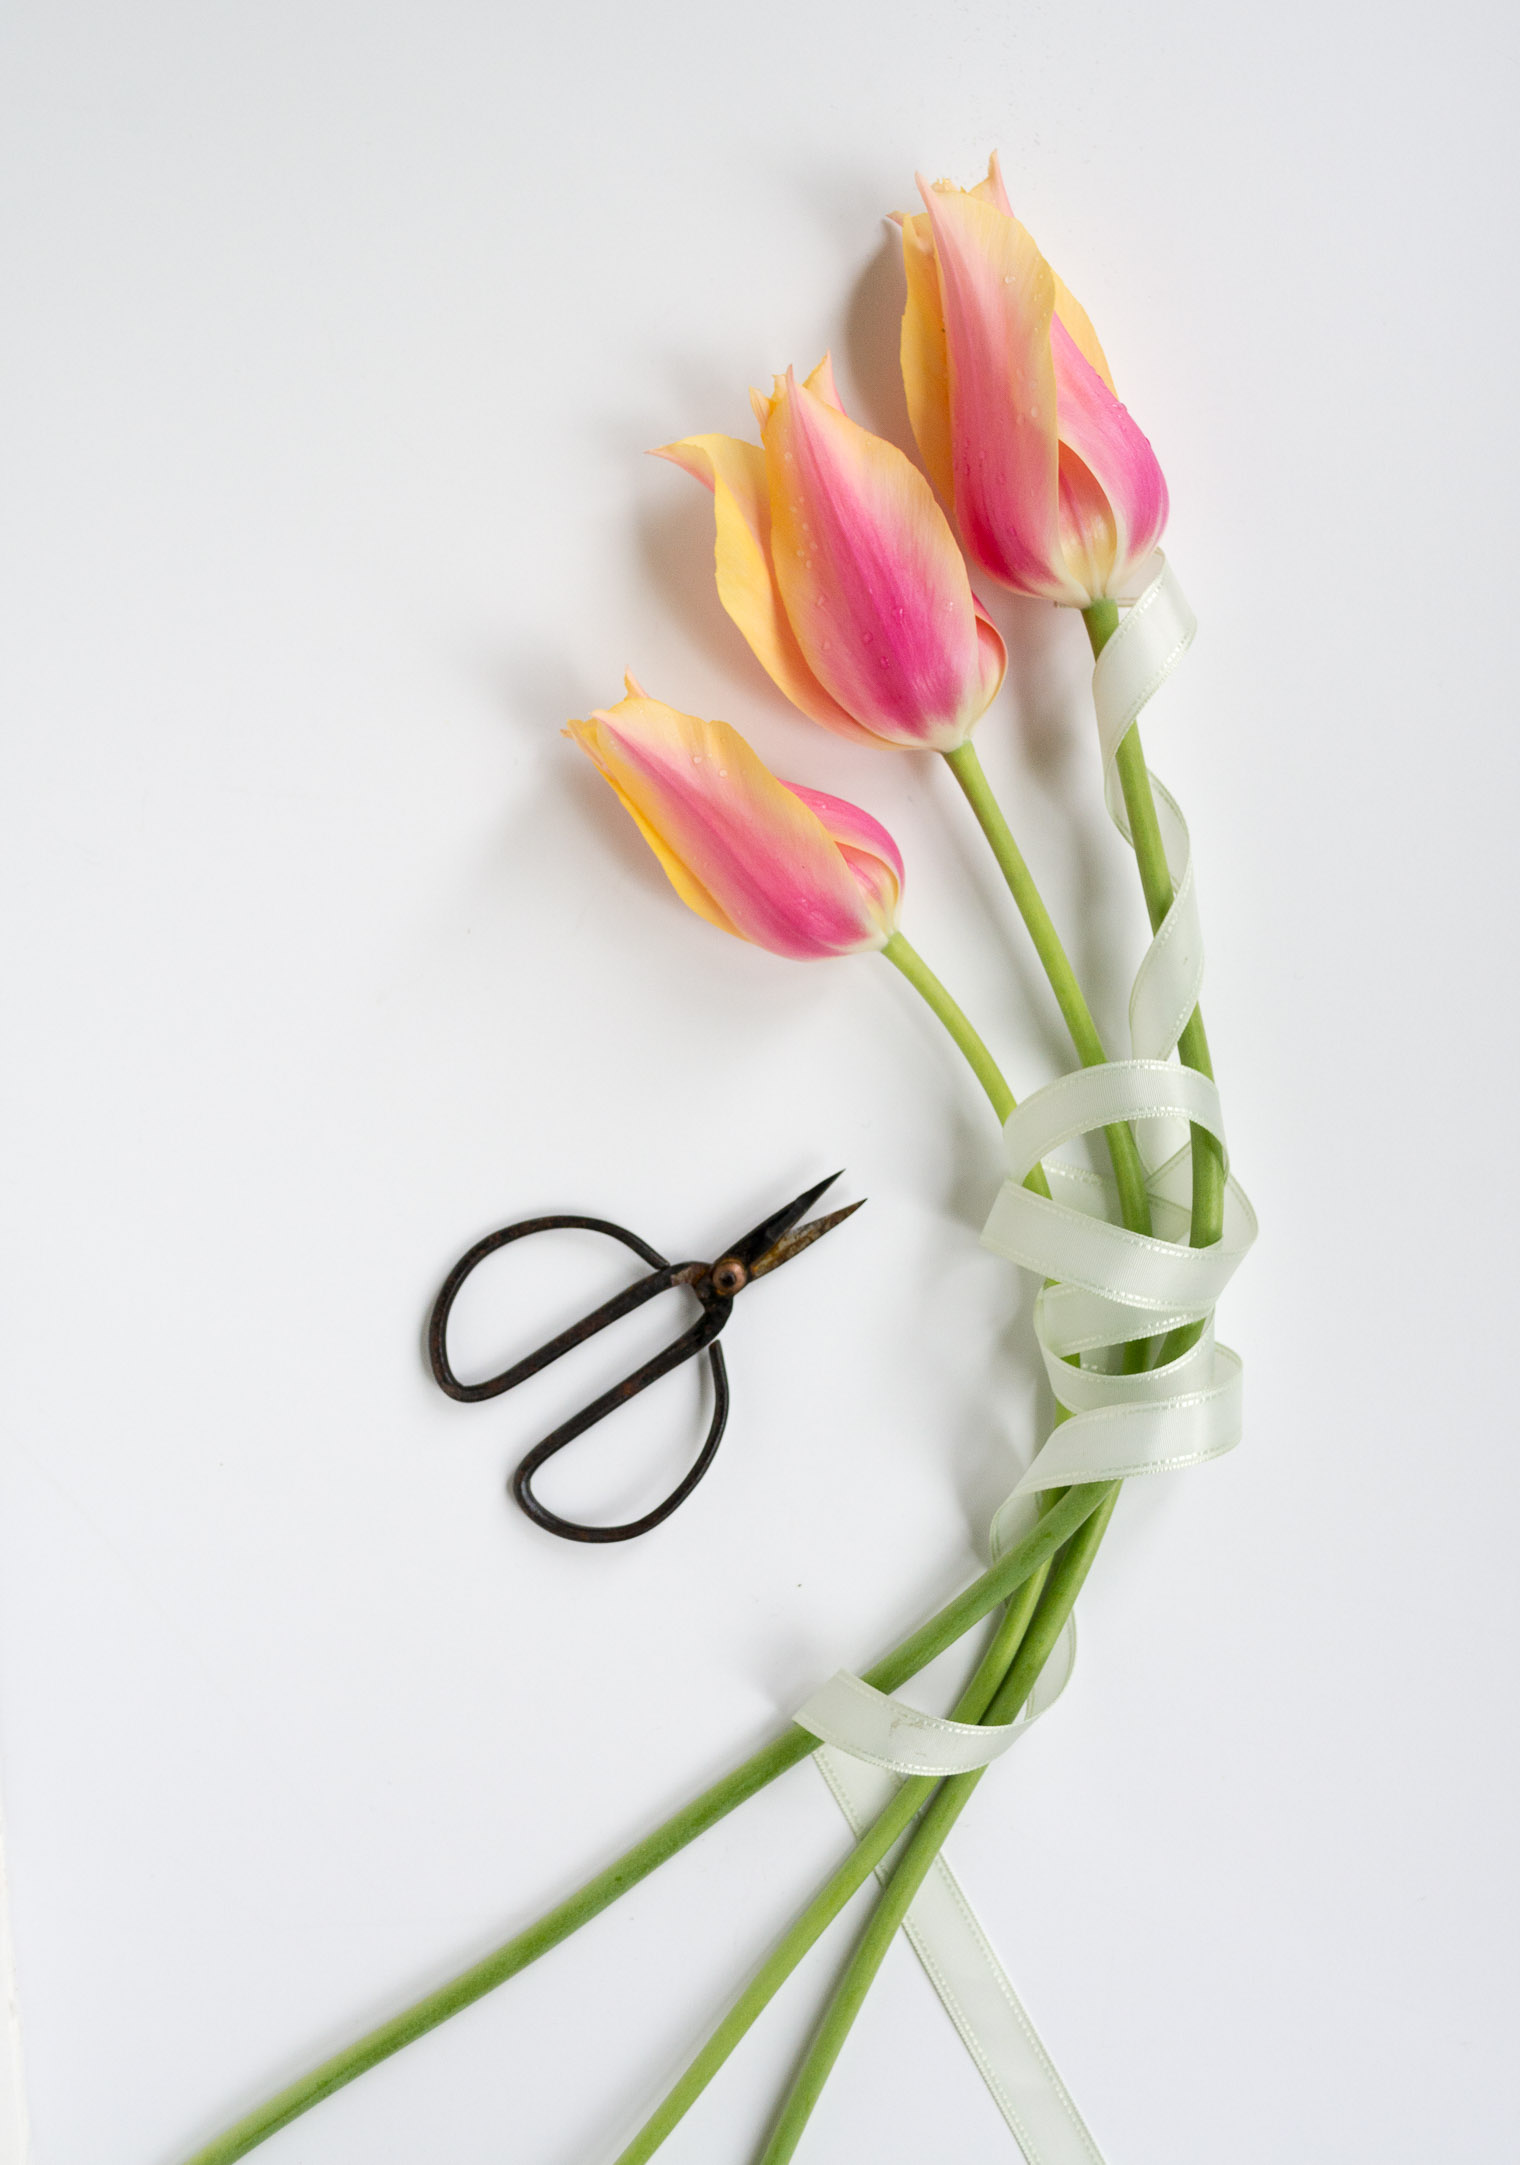 Sunday Sundries, Tulips, Lightroom Preset, Keeping With the Times